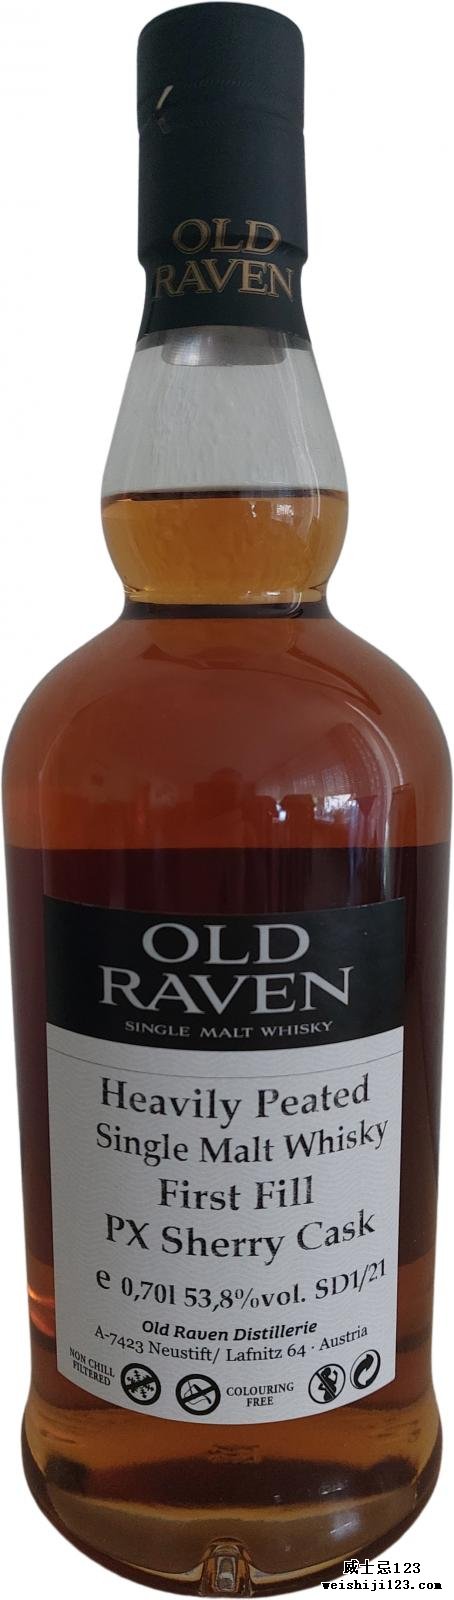 Old Raven 05-year-old